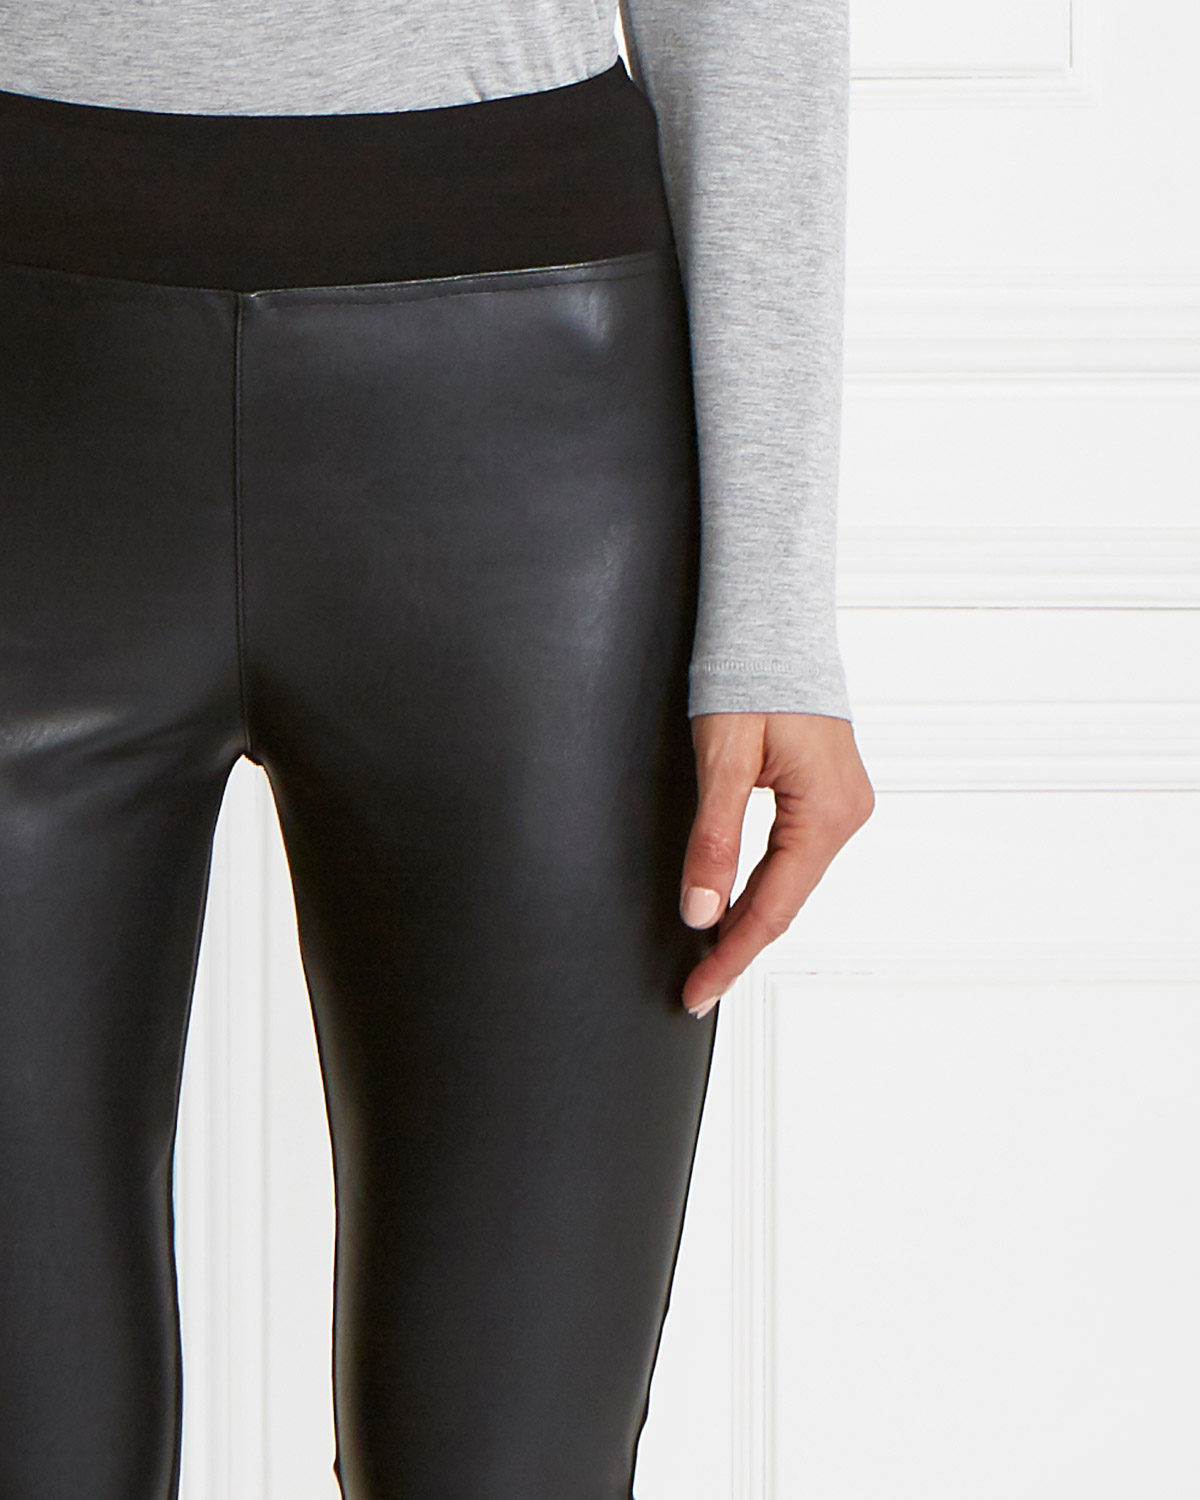 Dunnes Stores  Black Faux Leather High Waisted Treggings